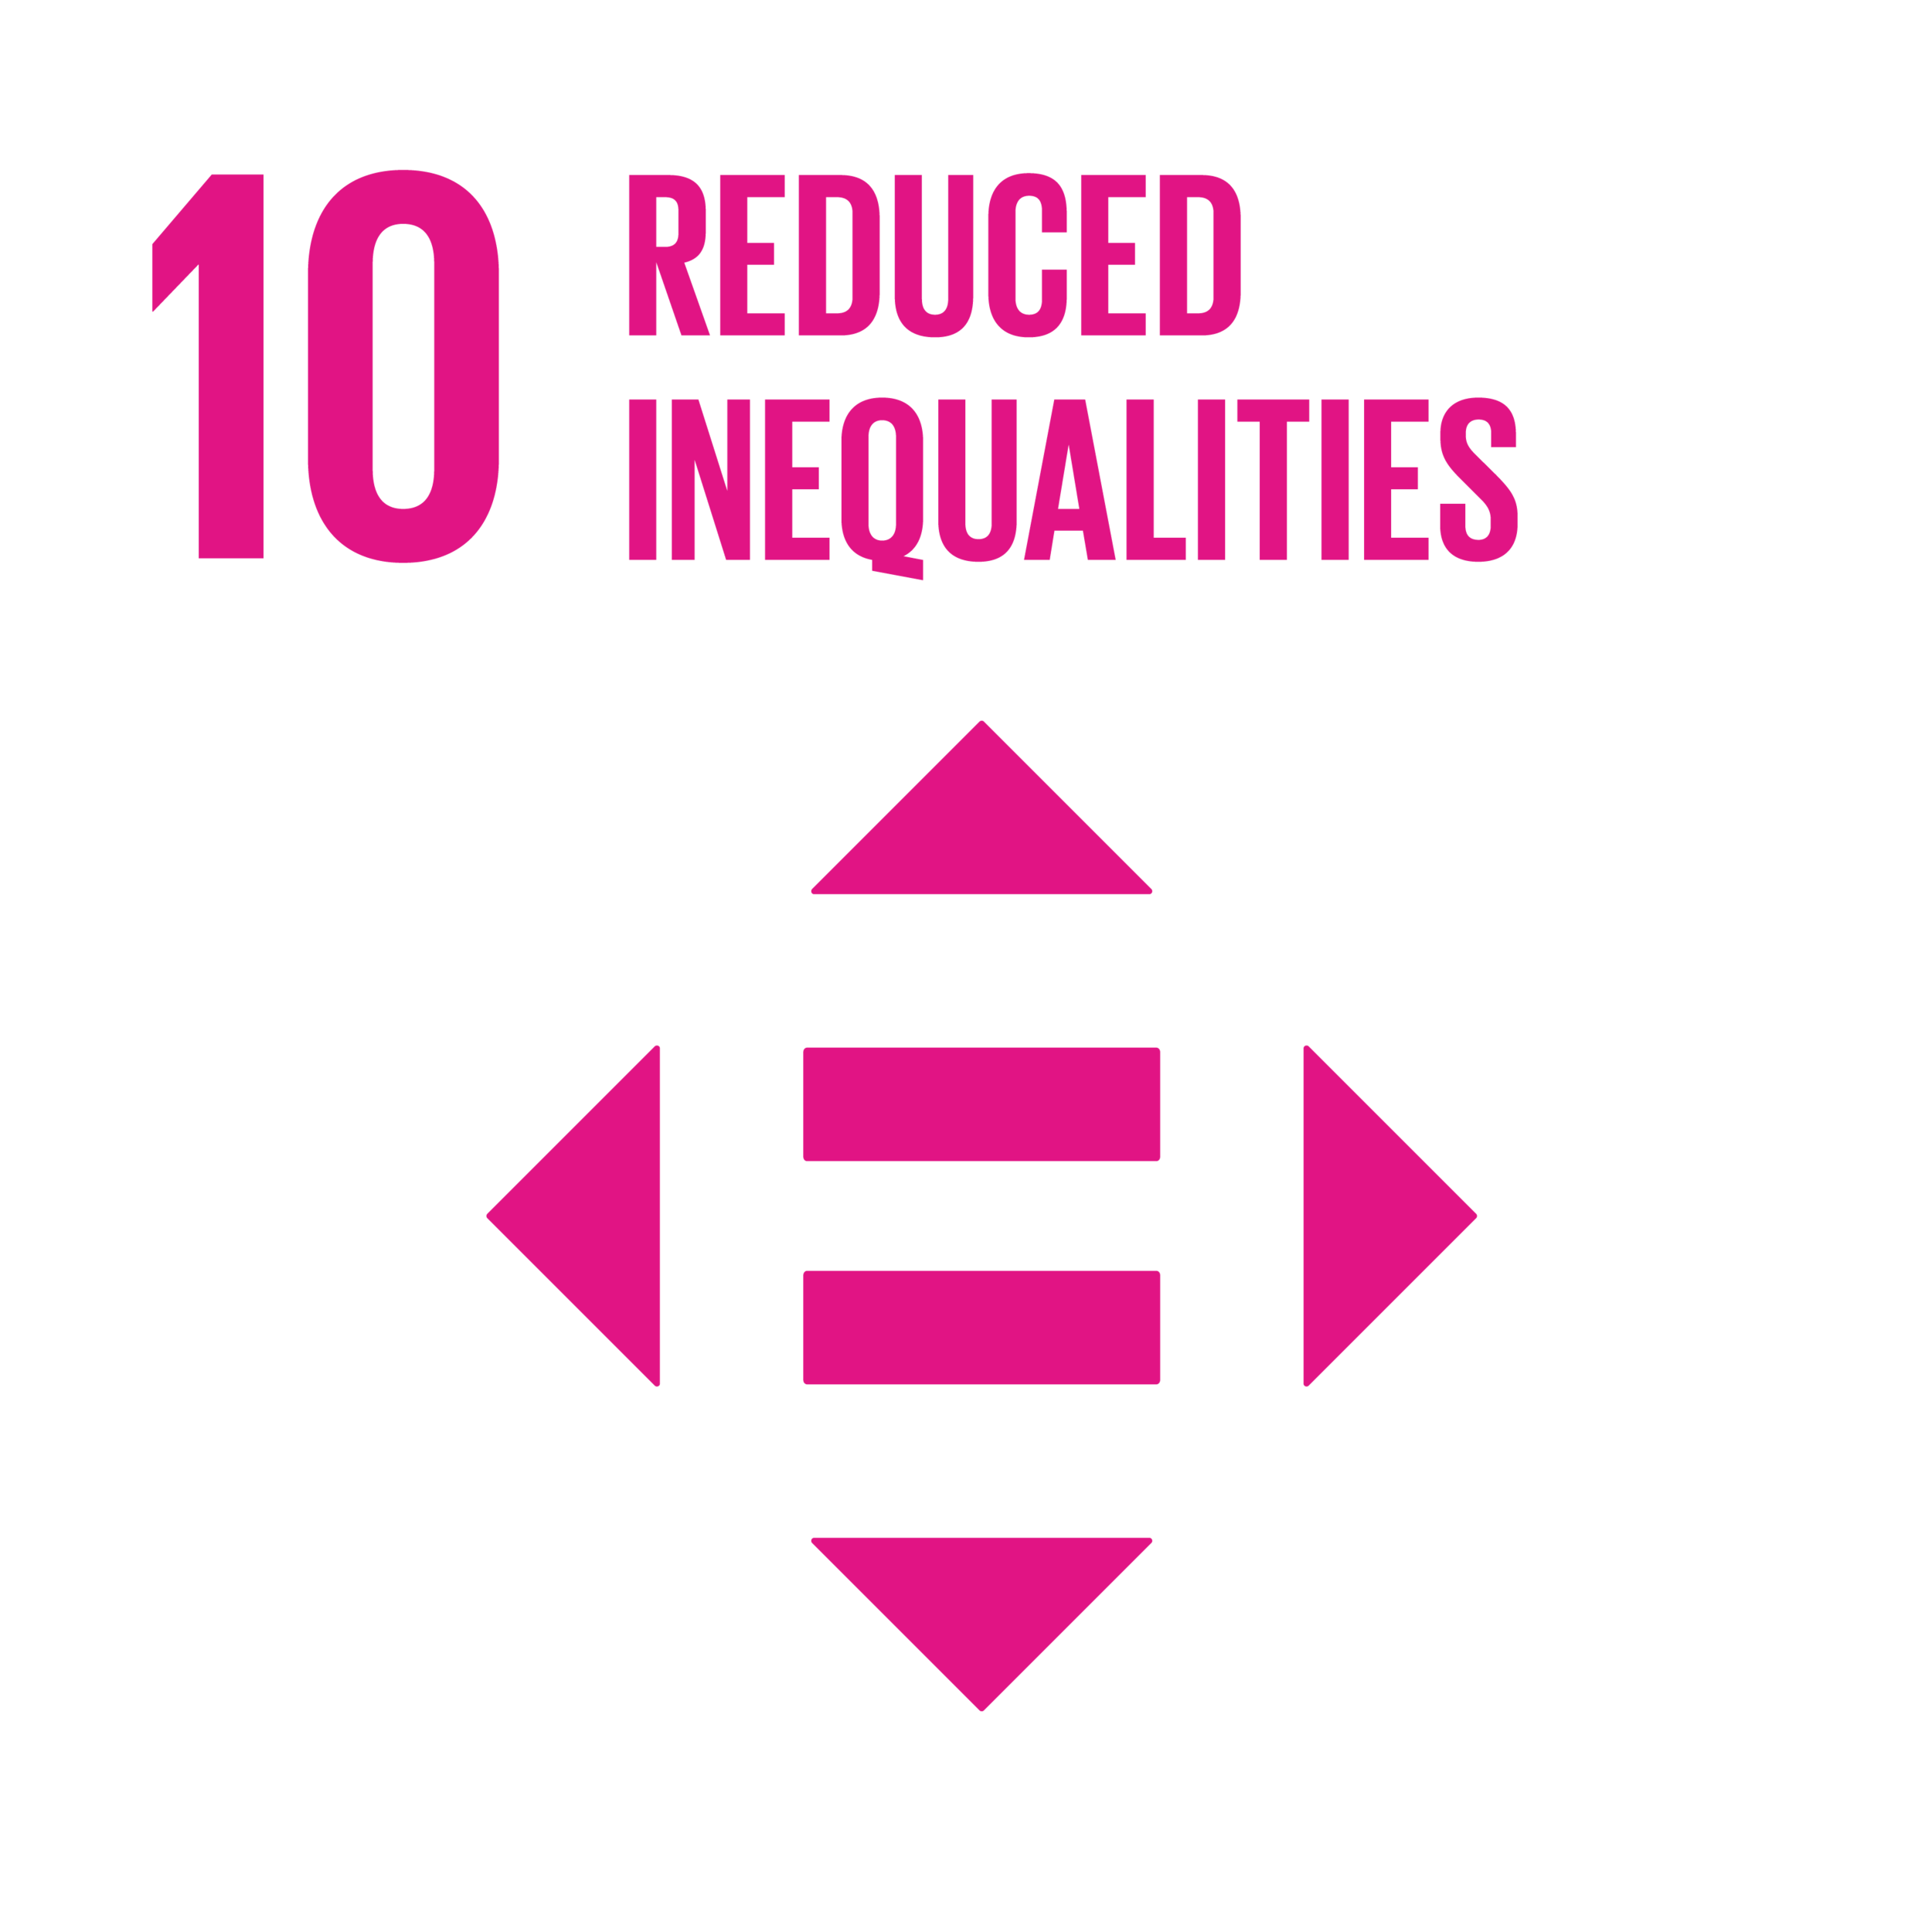 E_INVERTED SDG goals_icons-individual-RGB-10.png